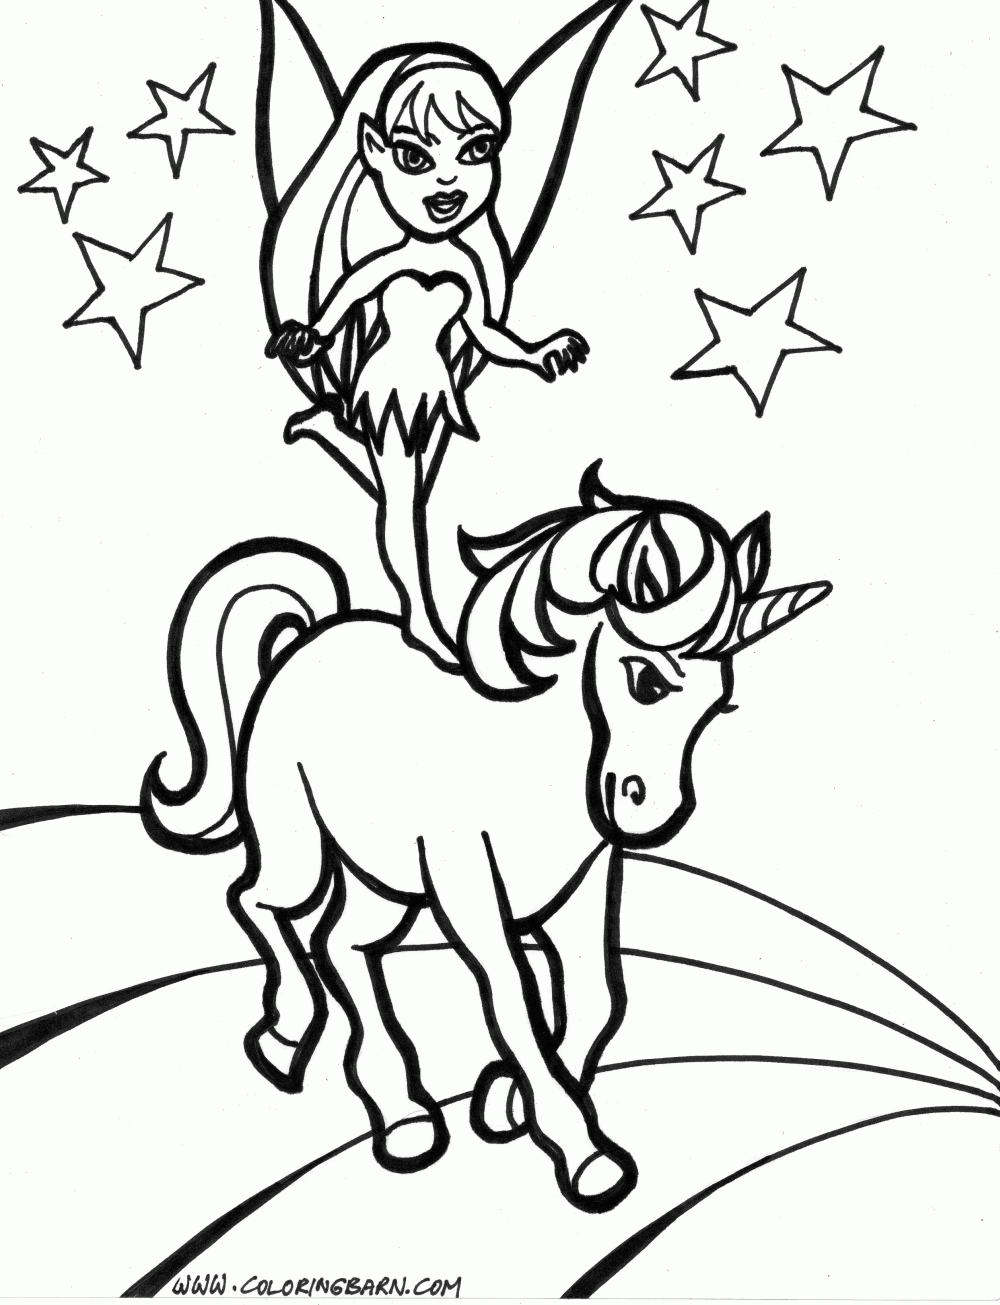 Unicorn Pictures To Color For Kids